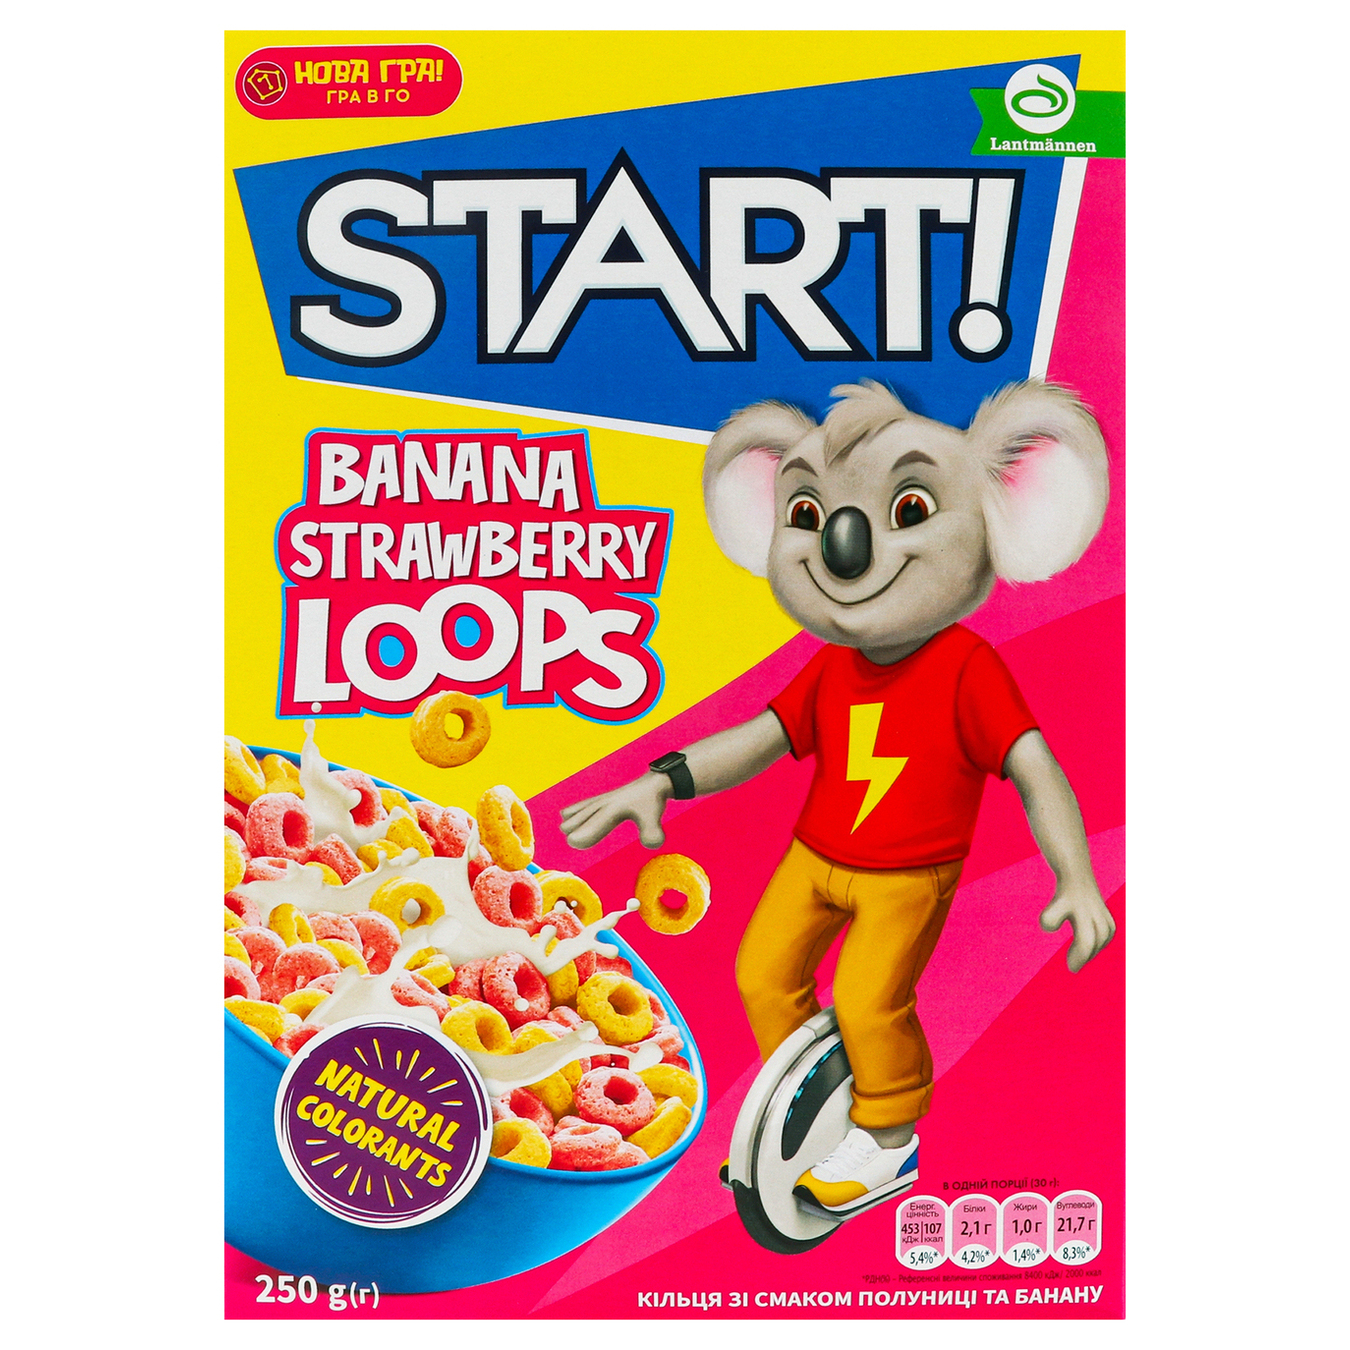 Start! Dry breakfast Rings with strawberry and banana flavor 250g